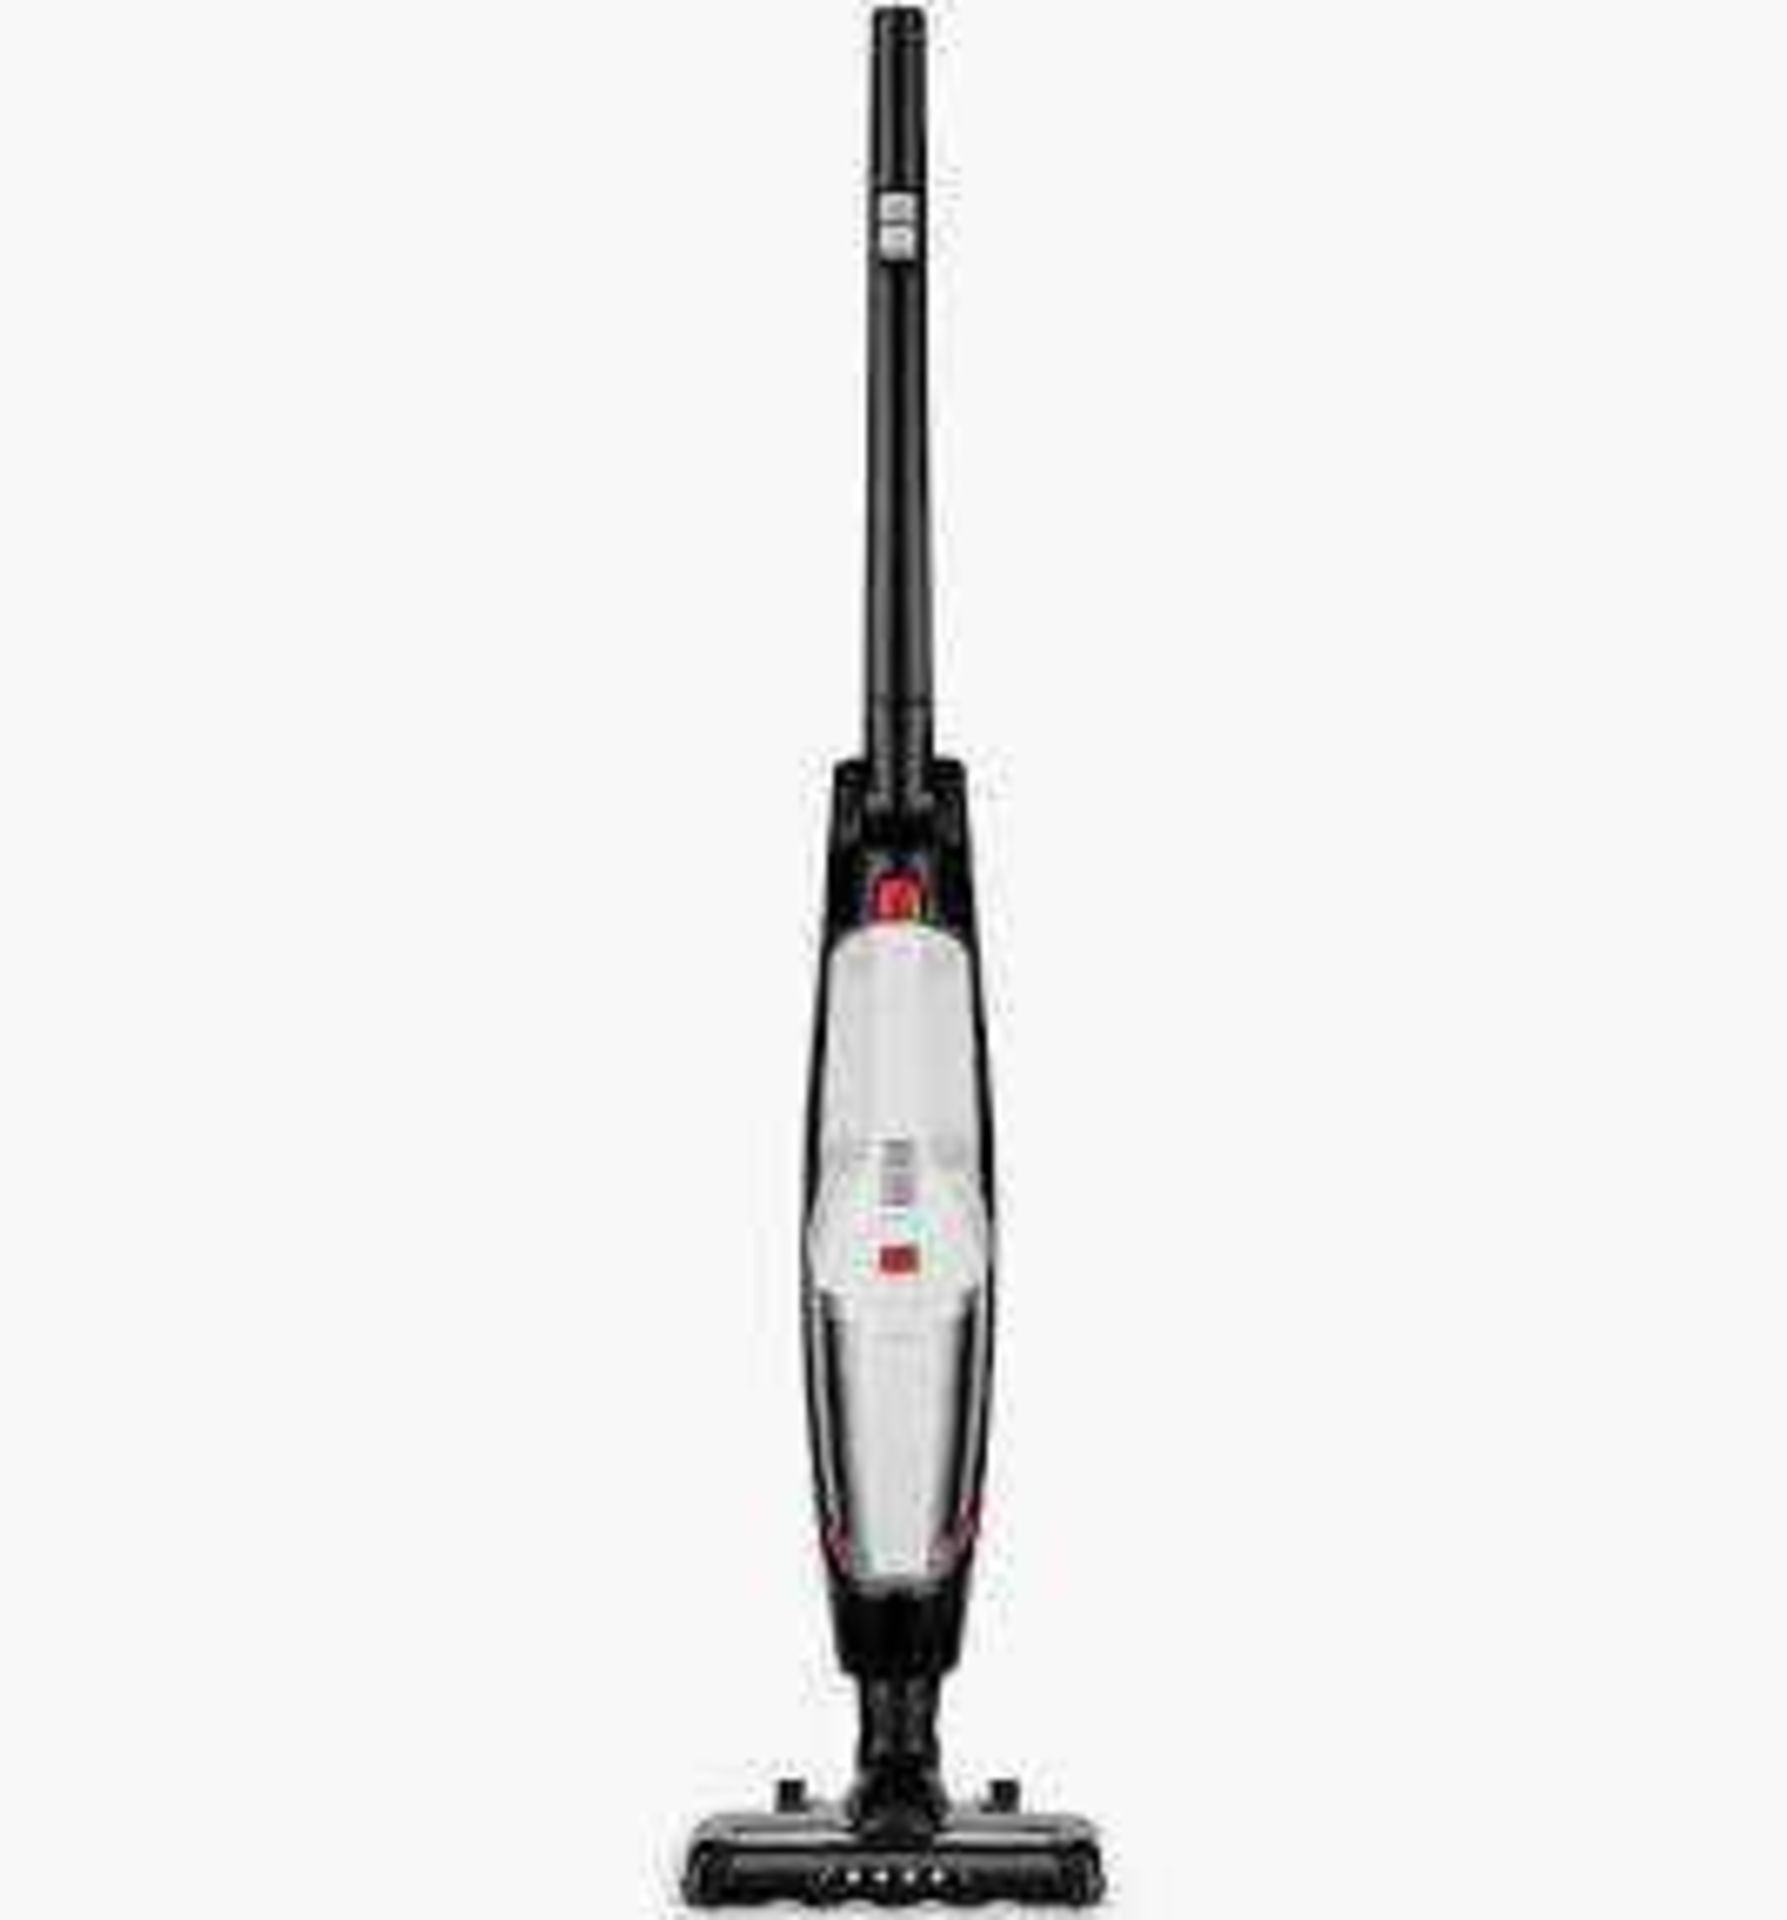 Combined RRP £200 Lot To Contain Two Unboxed John Lewis Cordless 2 In 1 Vacuum Cleaners In 0.4L Capa